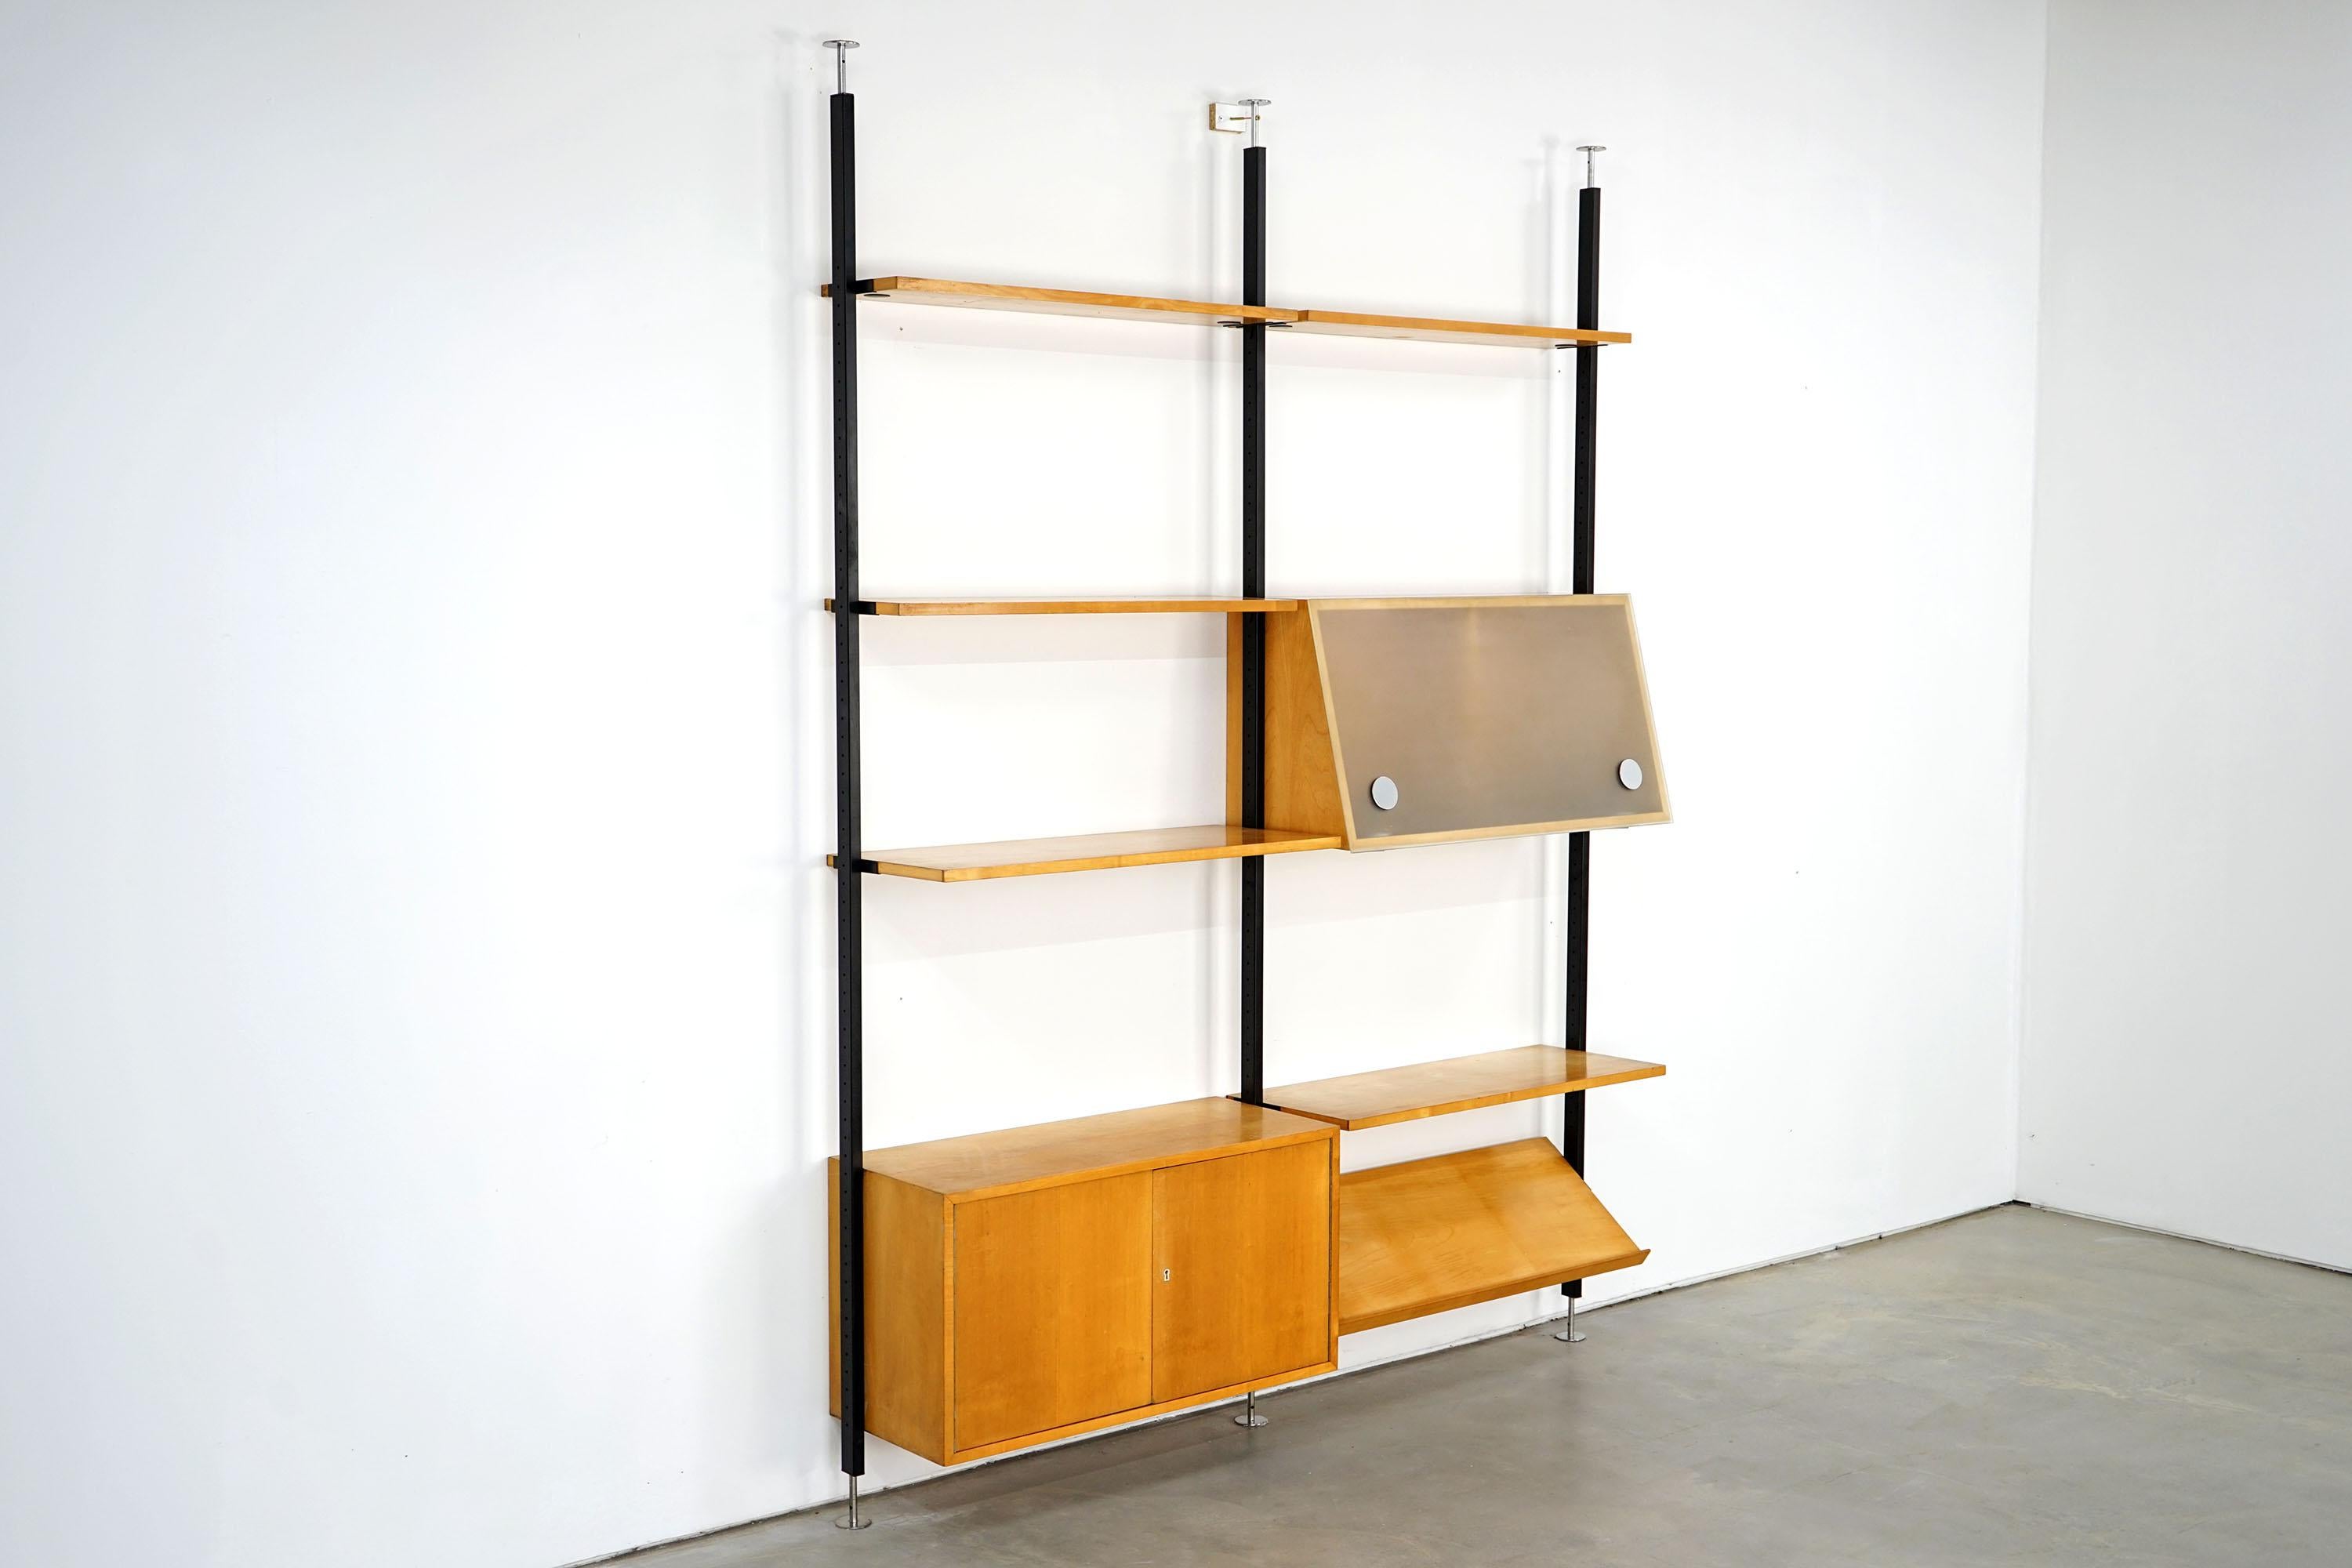 Functional, flexible and simple, this free-standing shelf system is designed by Ulrich P. Wieser for Bofinger-Wohnbedarf AG. Consisting of seven shelves, two cabinets and a newspaper rack, the shelf is an absolute eyecatcher. The black lacquered